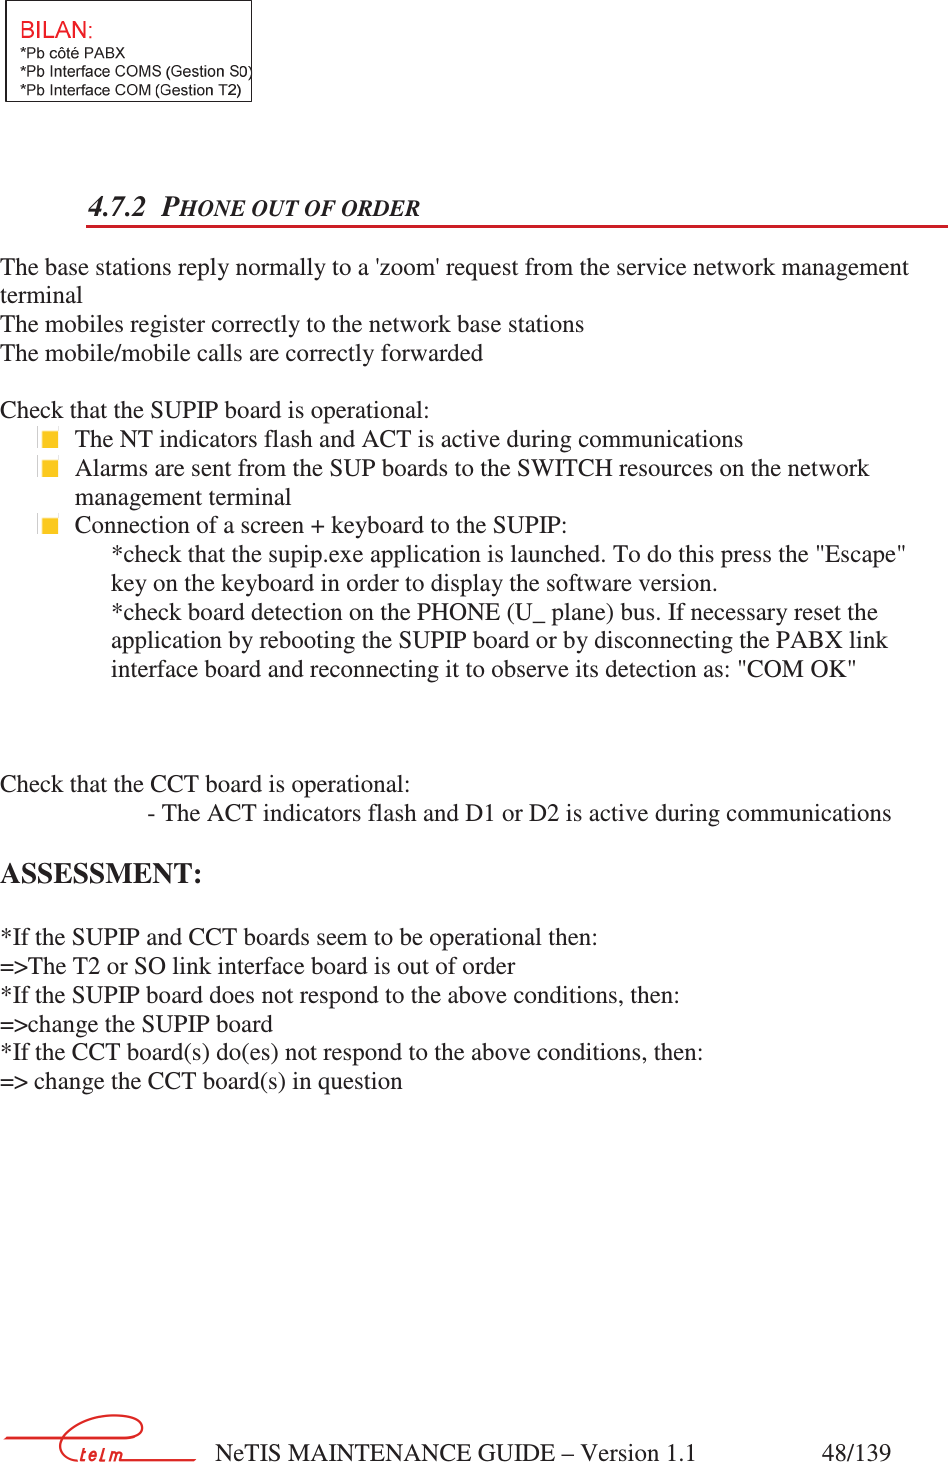        NeTIS MAINTENANCE GUIDE – Version 1.1                    48/139    4.7.2 PHONE OUT OF ORDER The base stations reply normally to a &apos;zoom&apos; request from the service network management terminal   The mobiles register correctly to the network base stations The mobile/mobile calls are correctly forwarded  Check that the SUPIP board is operational:  The NT indicators flash and ACT is active during communications  Alarms are sent from the SUP boards to the SWITCH resources on the network management terminal    Connection of a screen + keyboard to the SUPIP: *check that the supip.exe application is launched. To do this press the &quot;Escape&quot; key on the keyboard in order to display the software version.  *check board detection on the PHONE (U_ plane) bus. If necessary reset the application by rebooting the SUPIP board or by disconnecting the PABX link interface board and reconnecting it to observe its detection as: &quot;COM OK&quot;    Check that the CCT board is operational:     - The ACT indicators flash and D1 or D2 is active during communications  ASSESSMENT:  *If the SUPIP and CCT boards seem to be operational then: =&gt;The T2 or SO link interface board is out of order *If the SUPIP board does not respond to the above conditions, then: =&gt;change the SUPIP board *If the CCT board(s) do(es) not respond to the above conditions, then: =&gt; change the CCT board(s) in question    